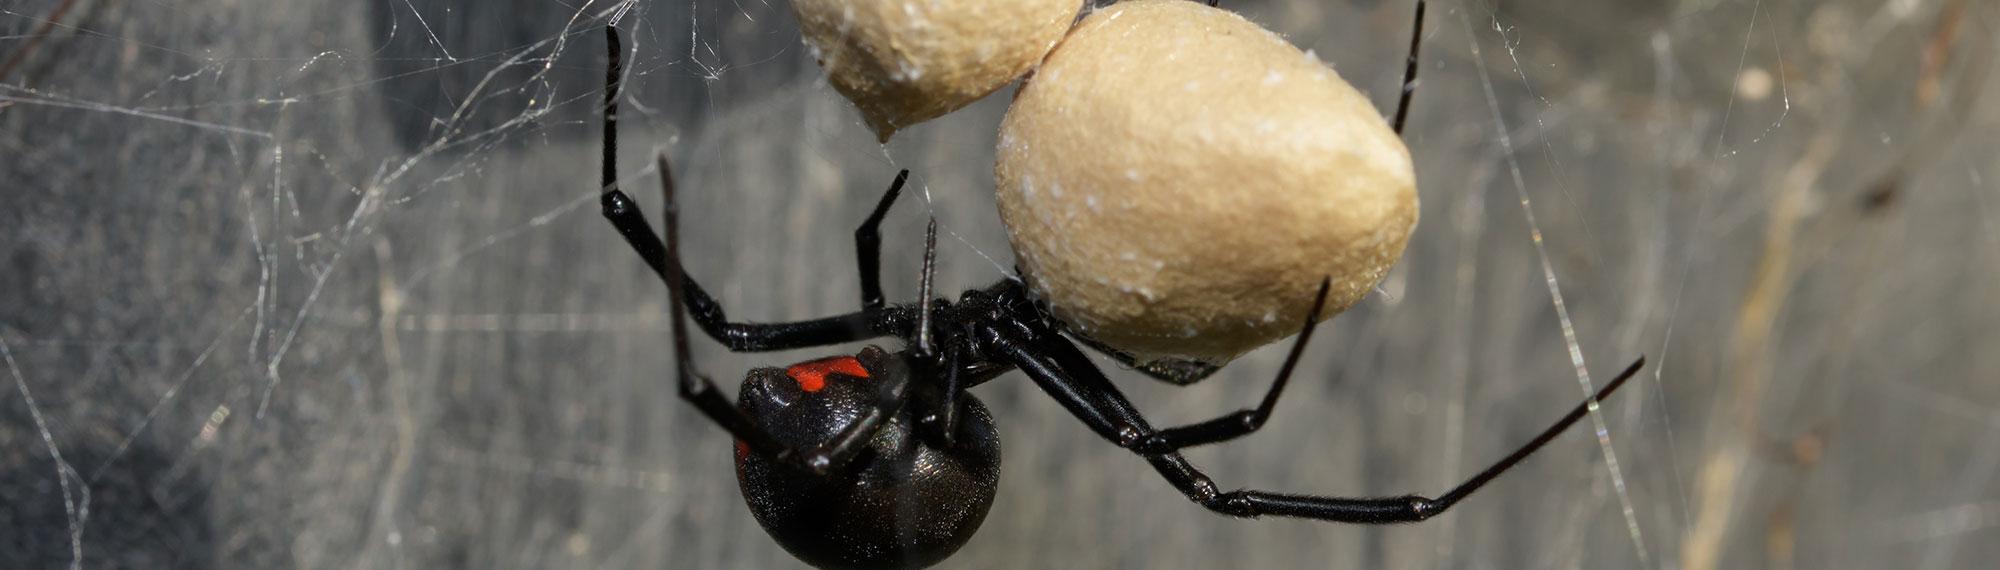 black widow spider and eggs